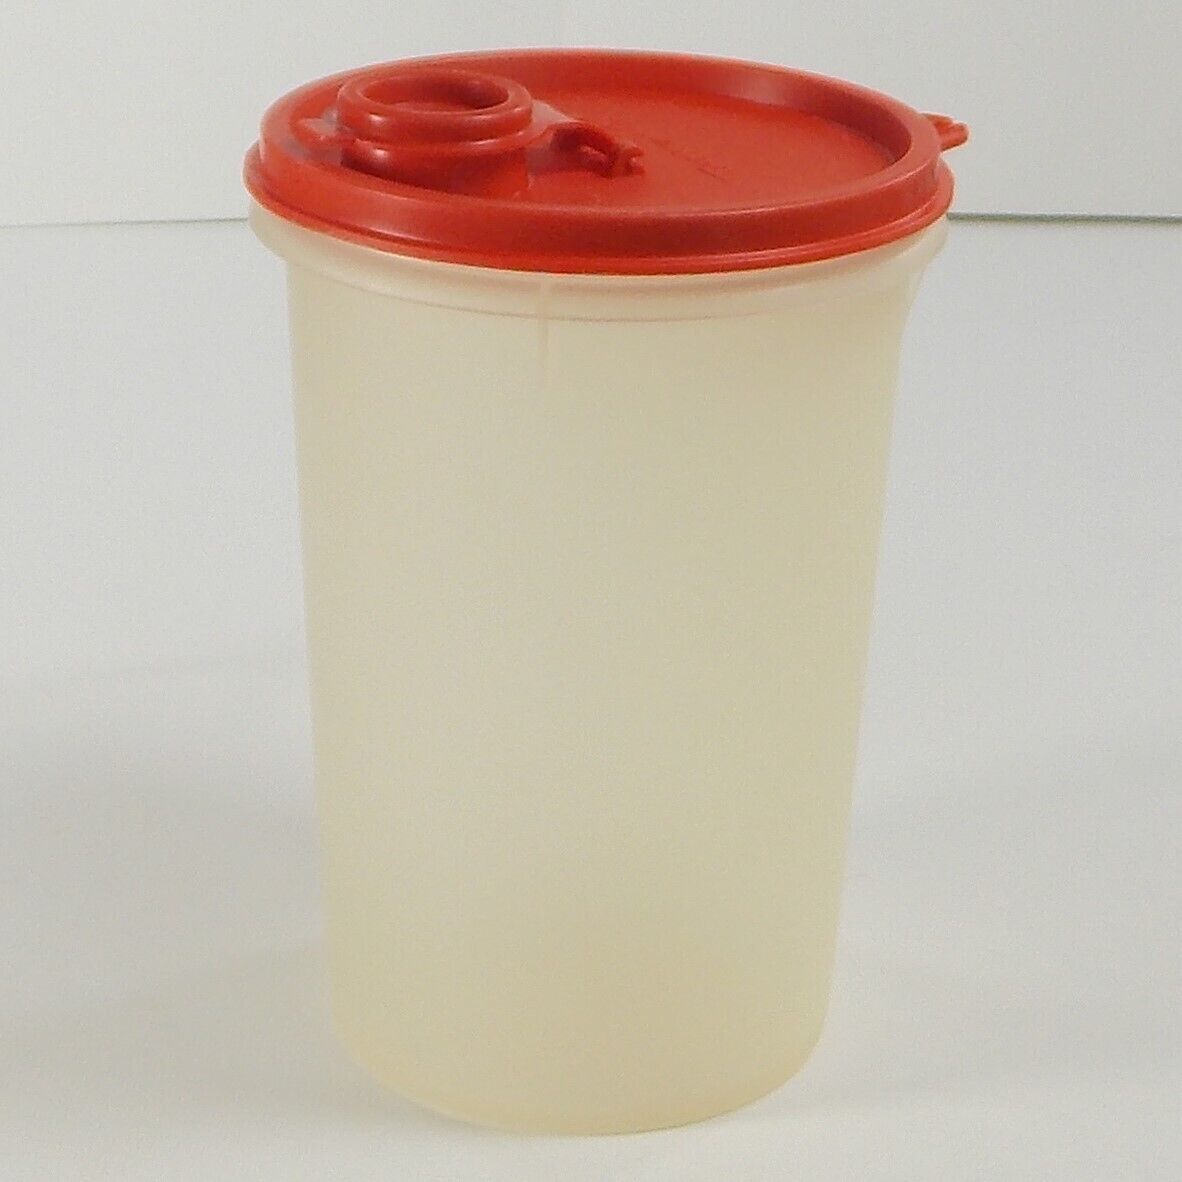 Vtg Tupperware Handolier Container And Red Pour All Seal Cap Lid 321-12 563-8